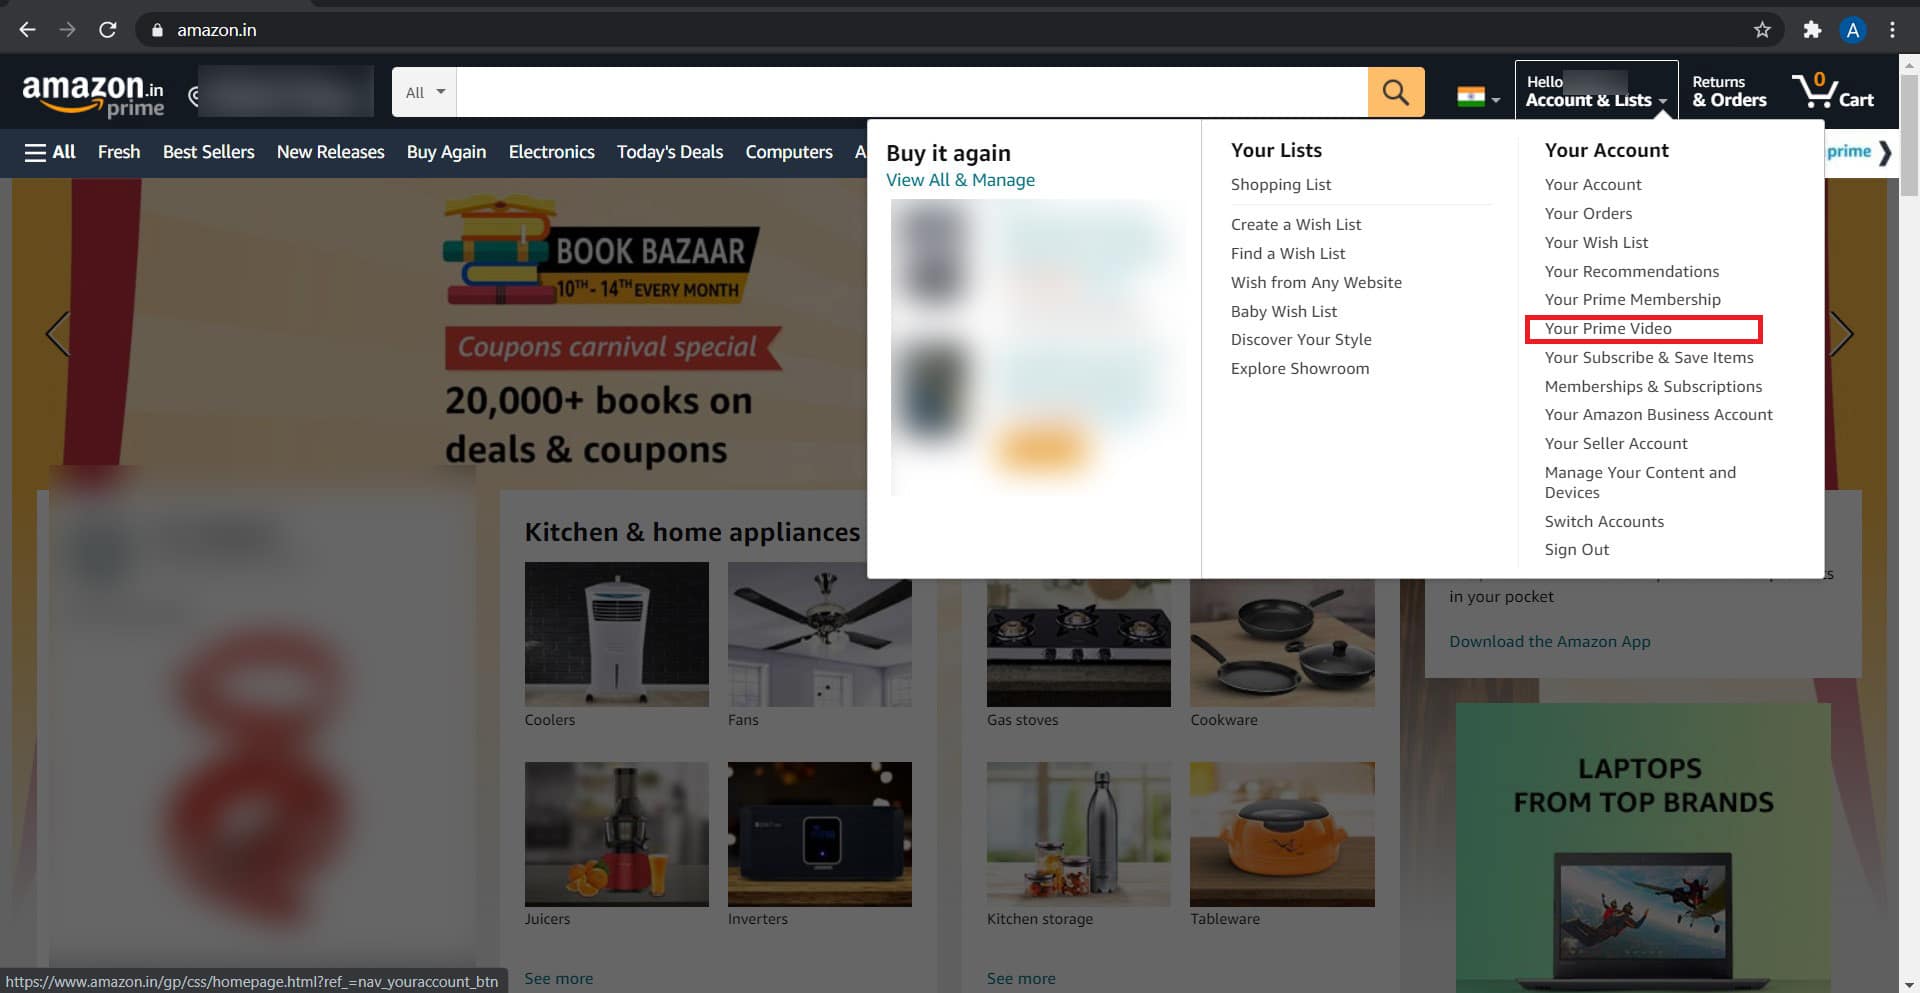 Click on ‘Your Prime Video’ to open your Amazon Prime Video account